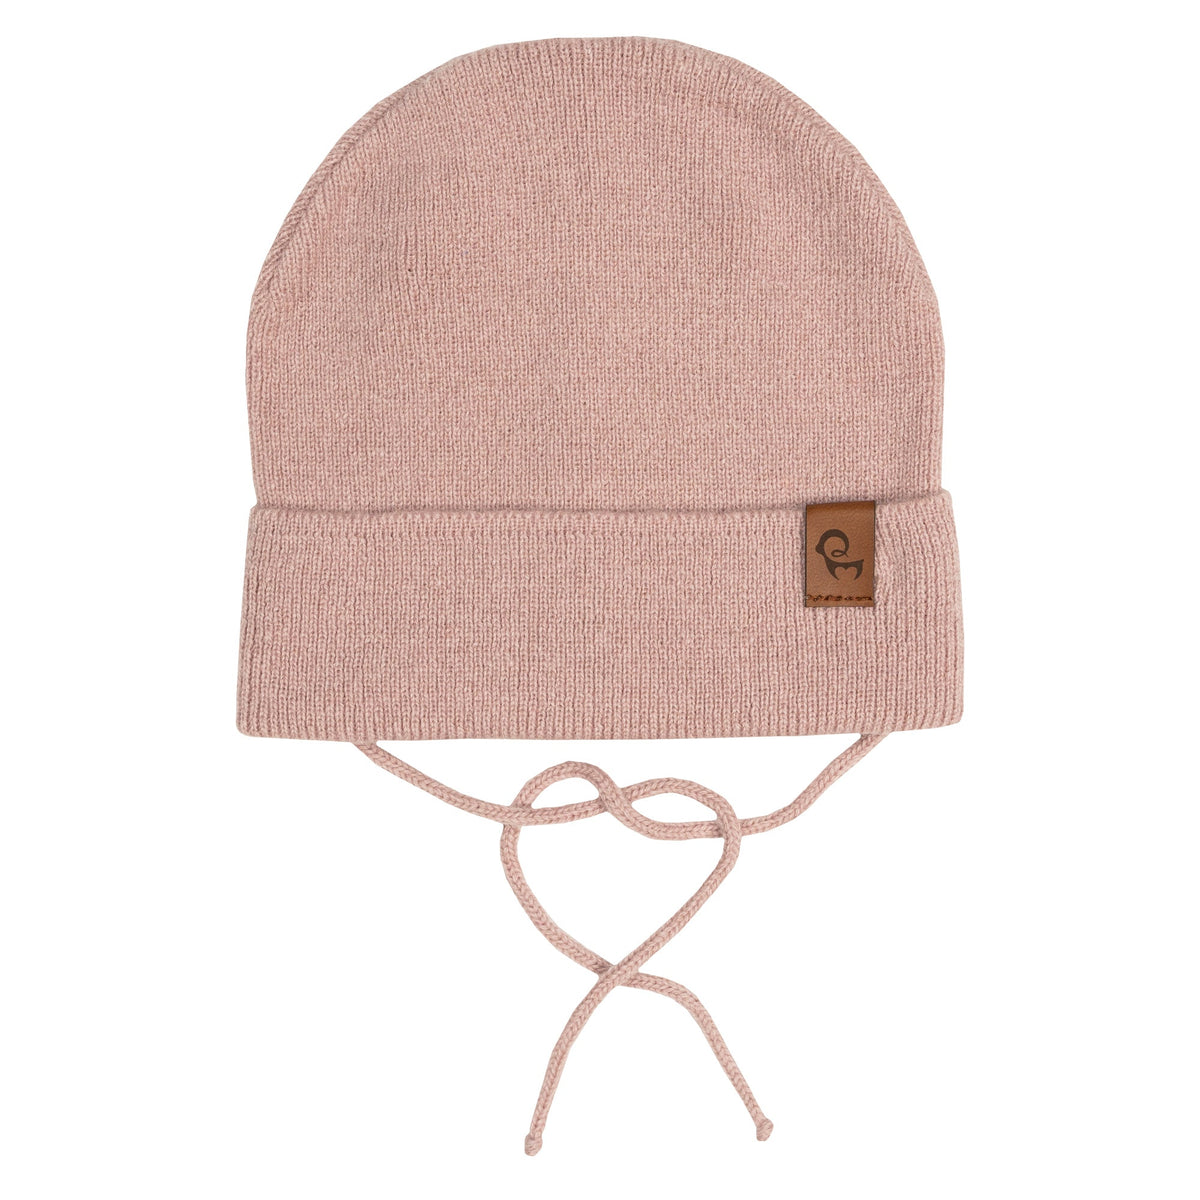 MENIQUE Baby Knit Beanie with Strings Cashmere Blend